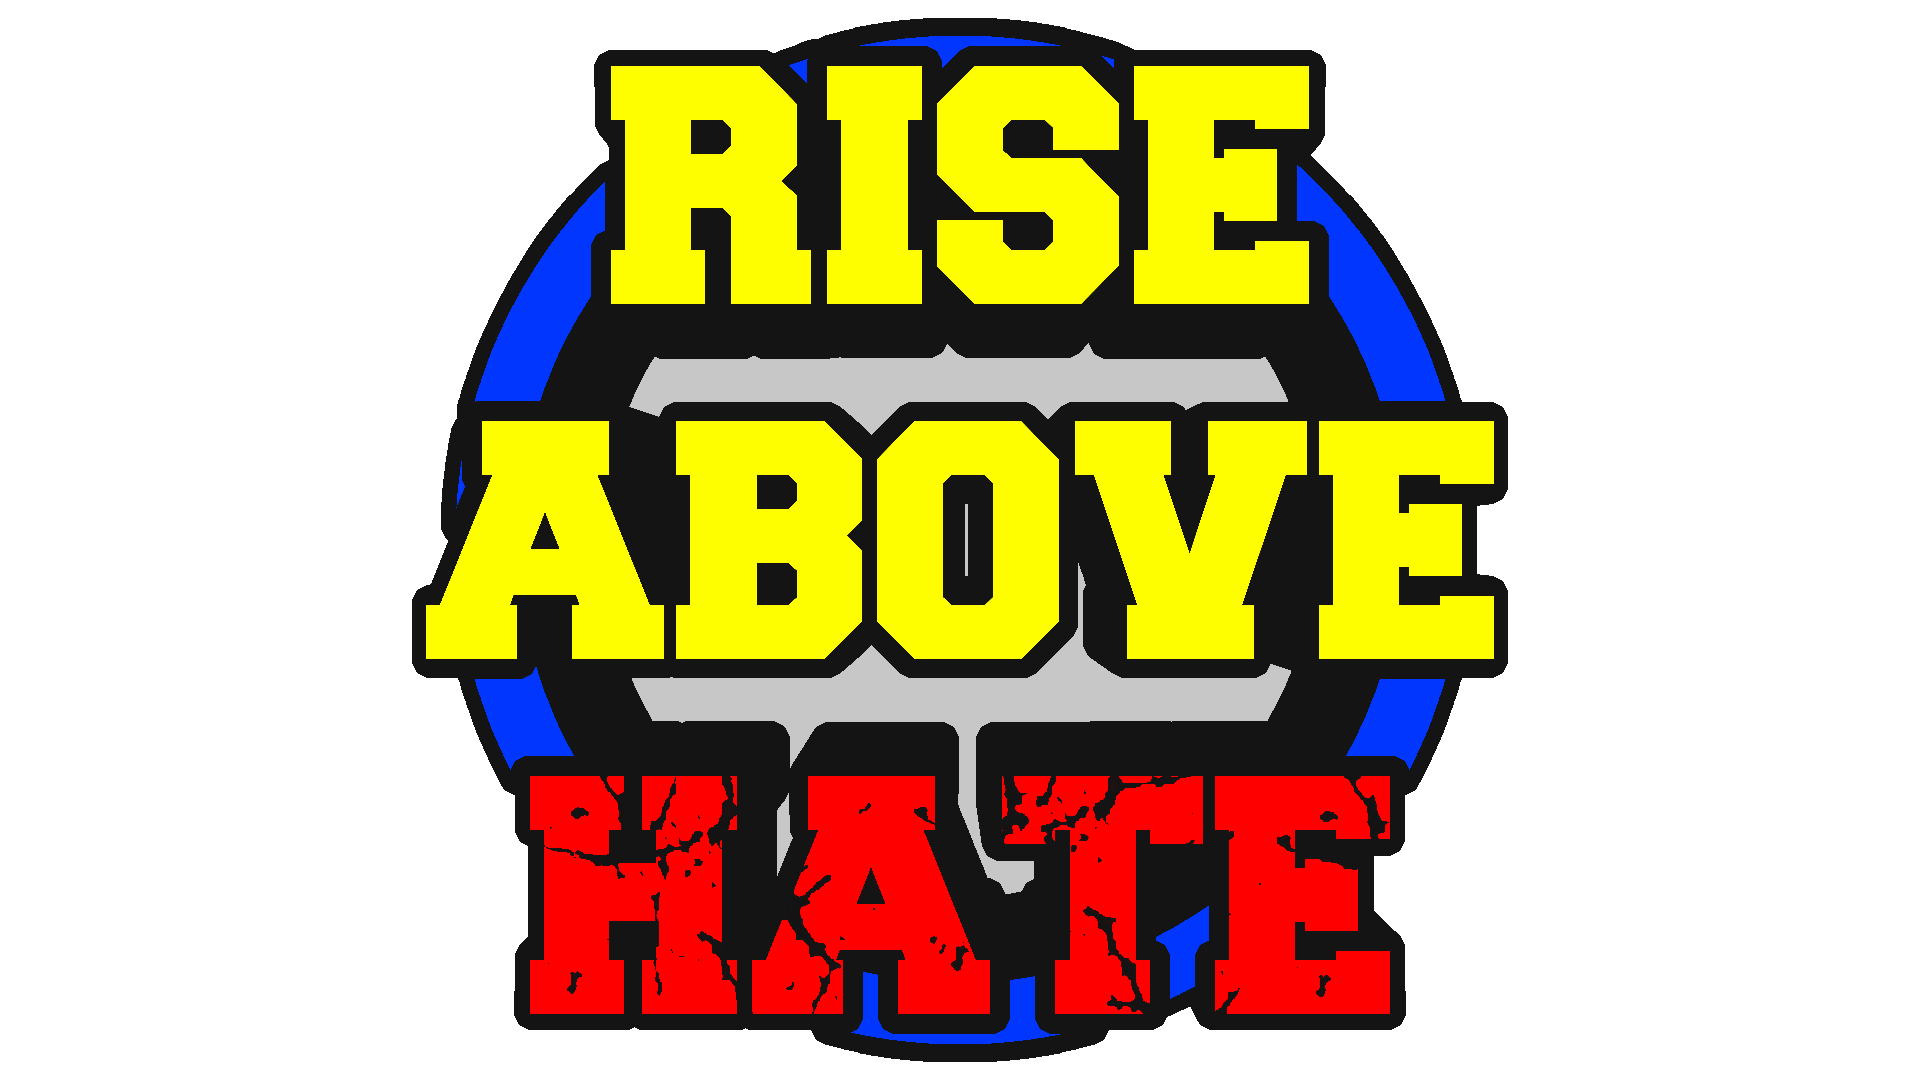 Rise above hate tribute to